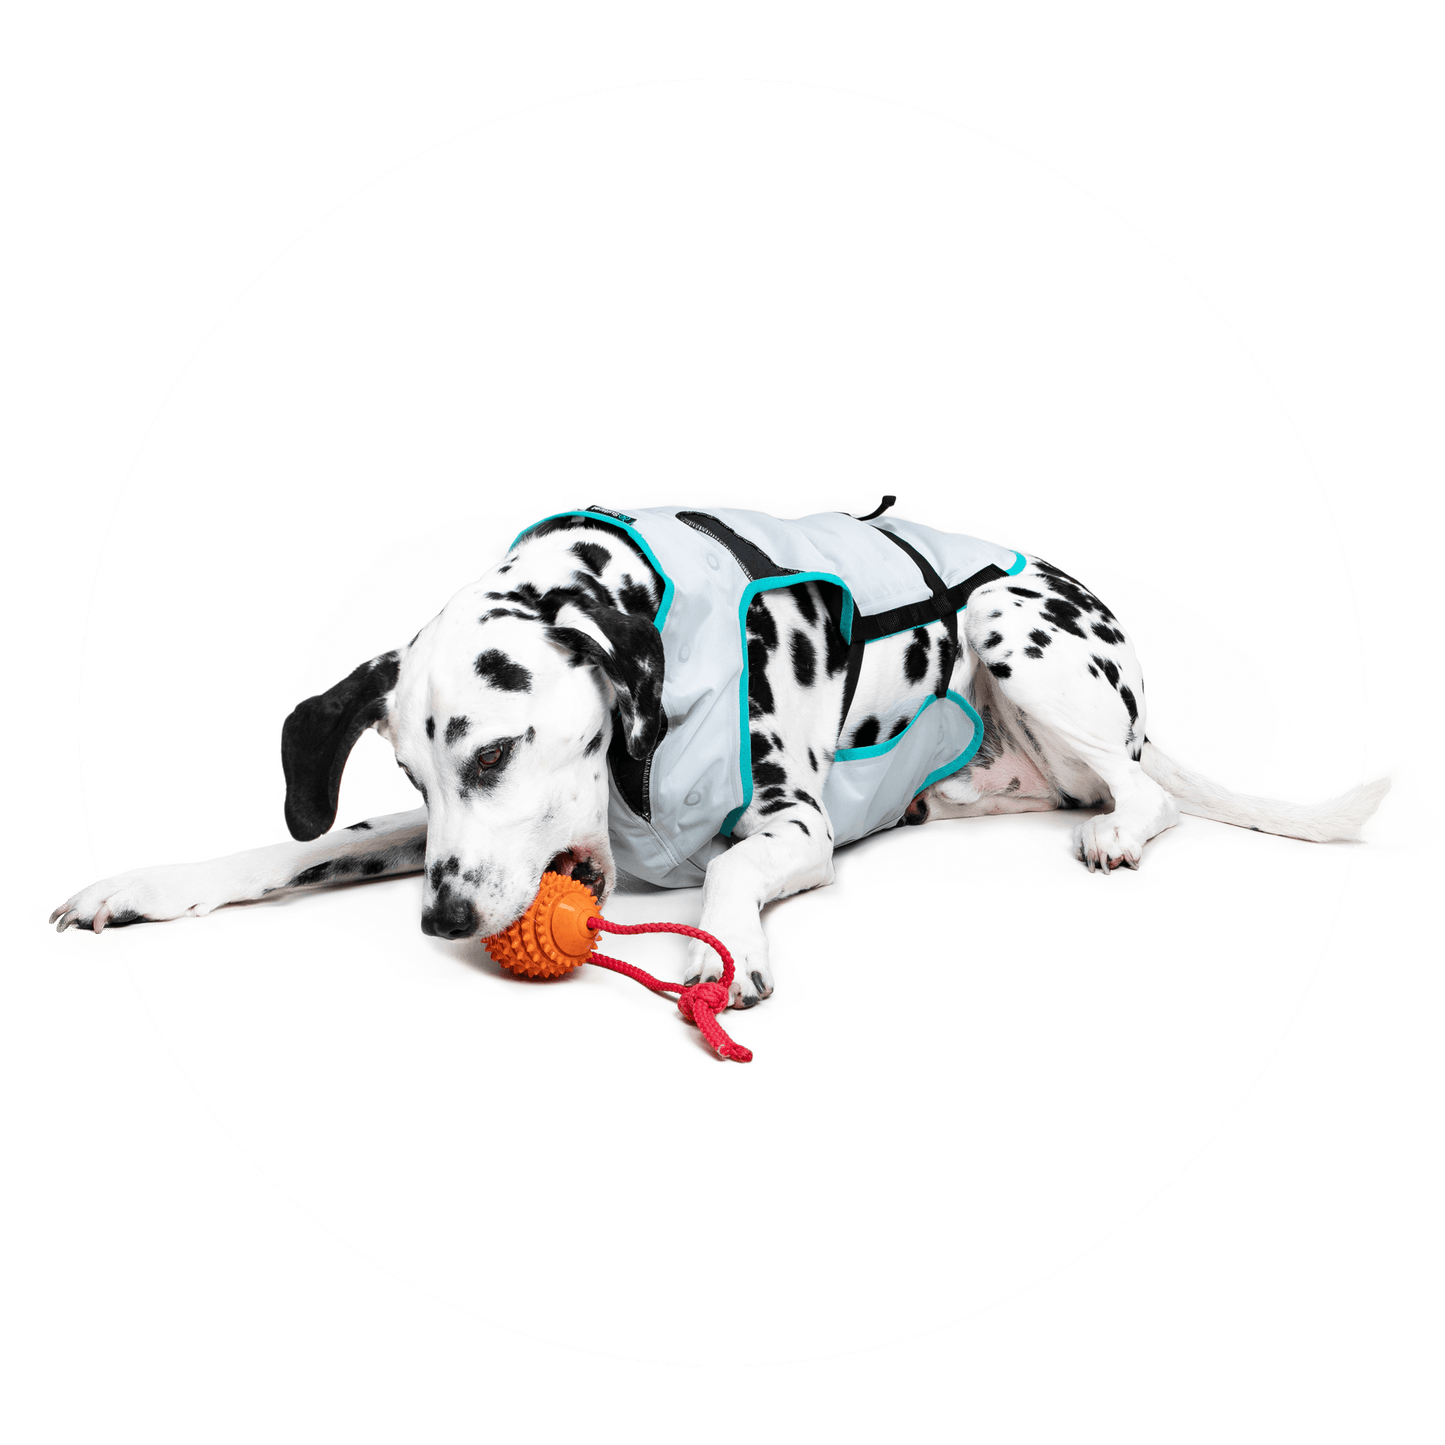 Suitical DRY® Cooling Vest for Dogs - Vital Vet